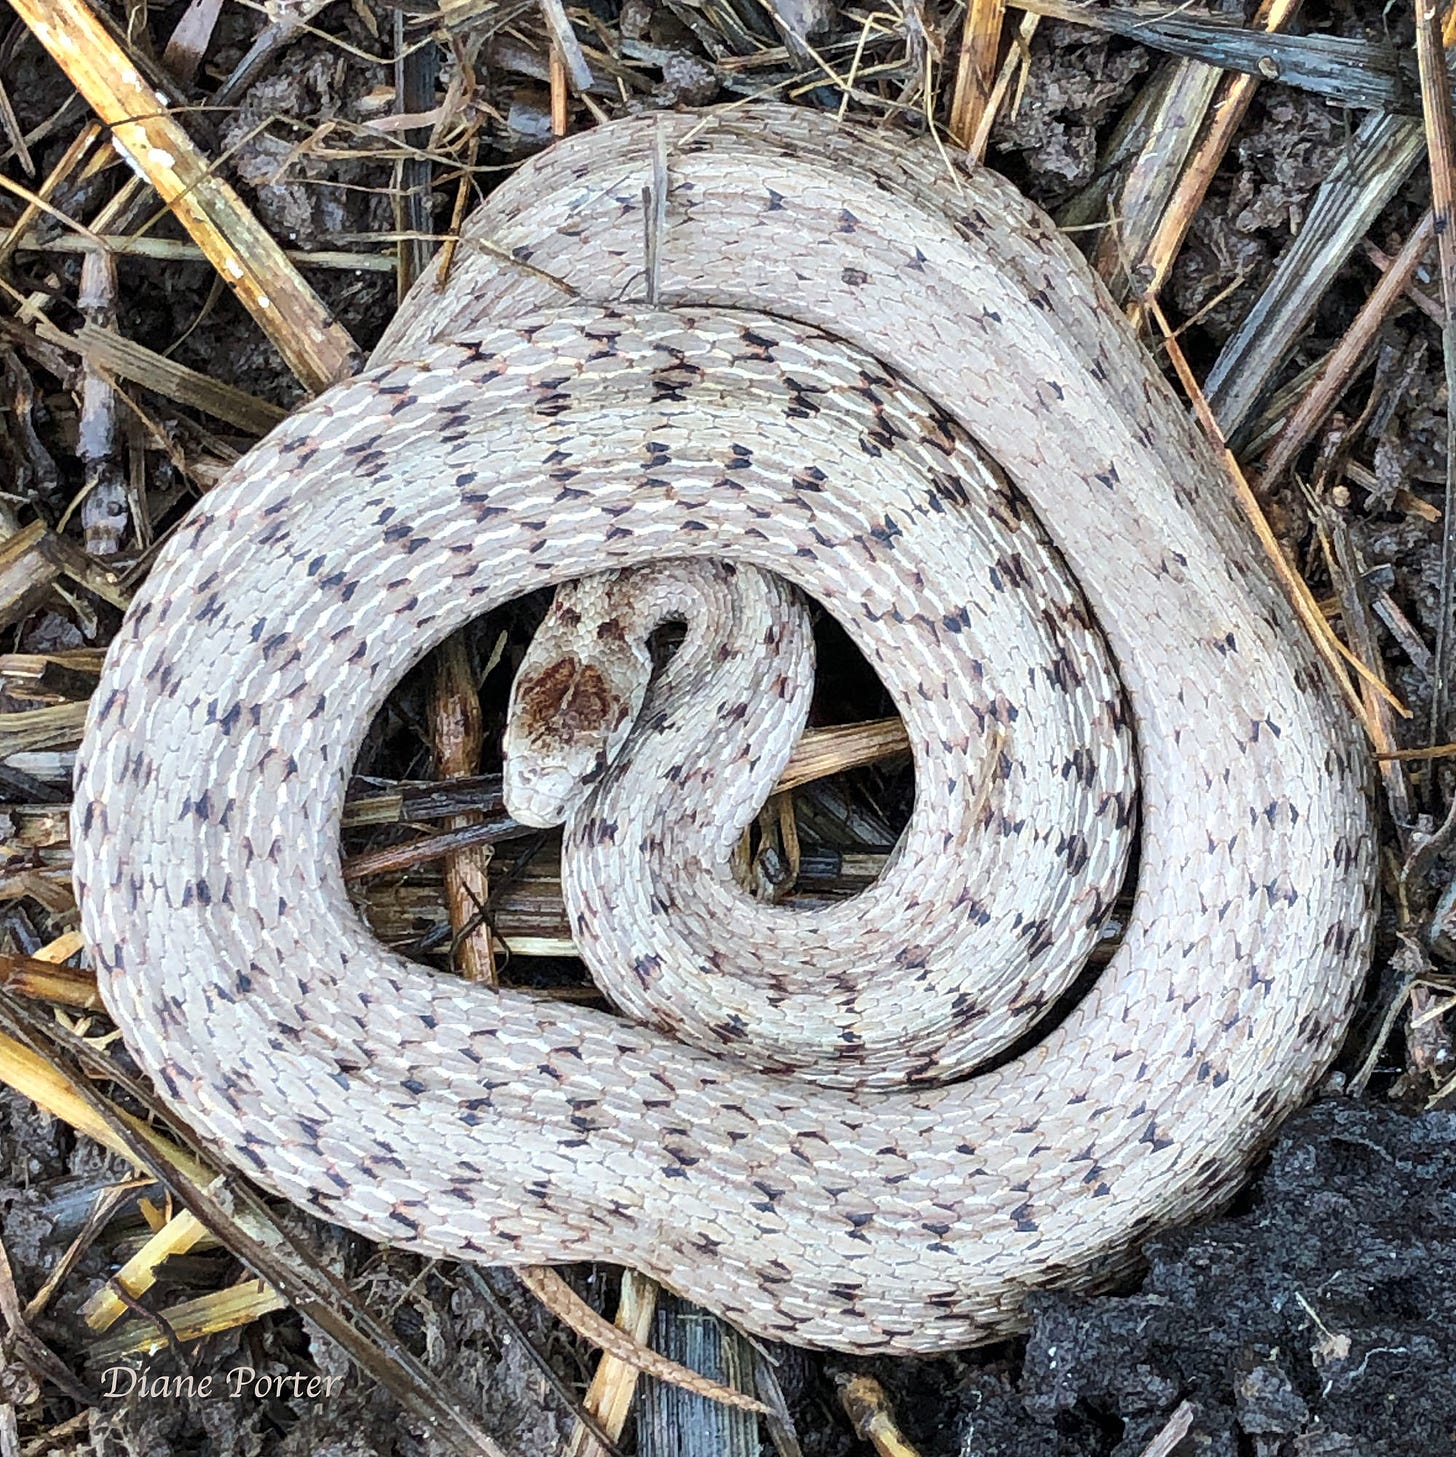 DeKay's Brownsnakes have a double smudge on top of the head. This individual is pale grey.